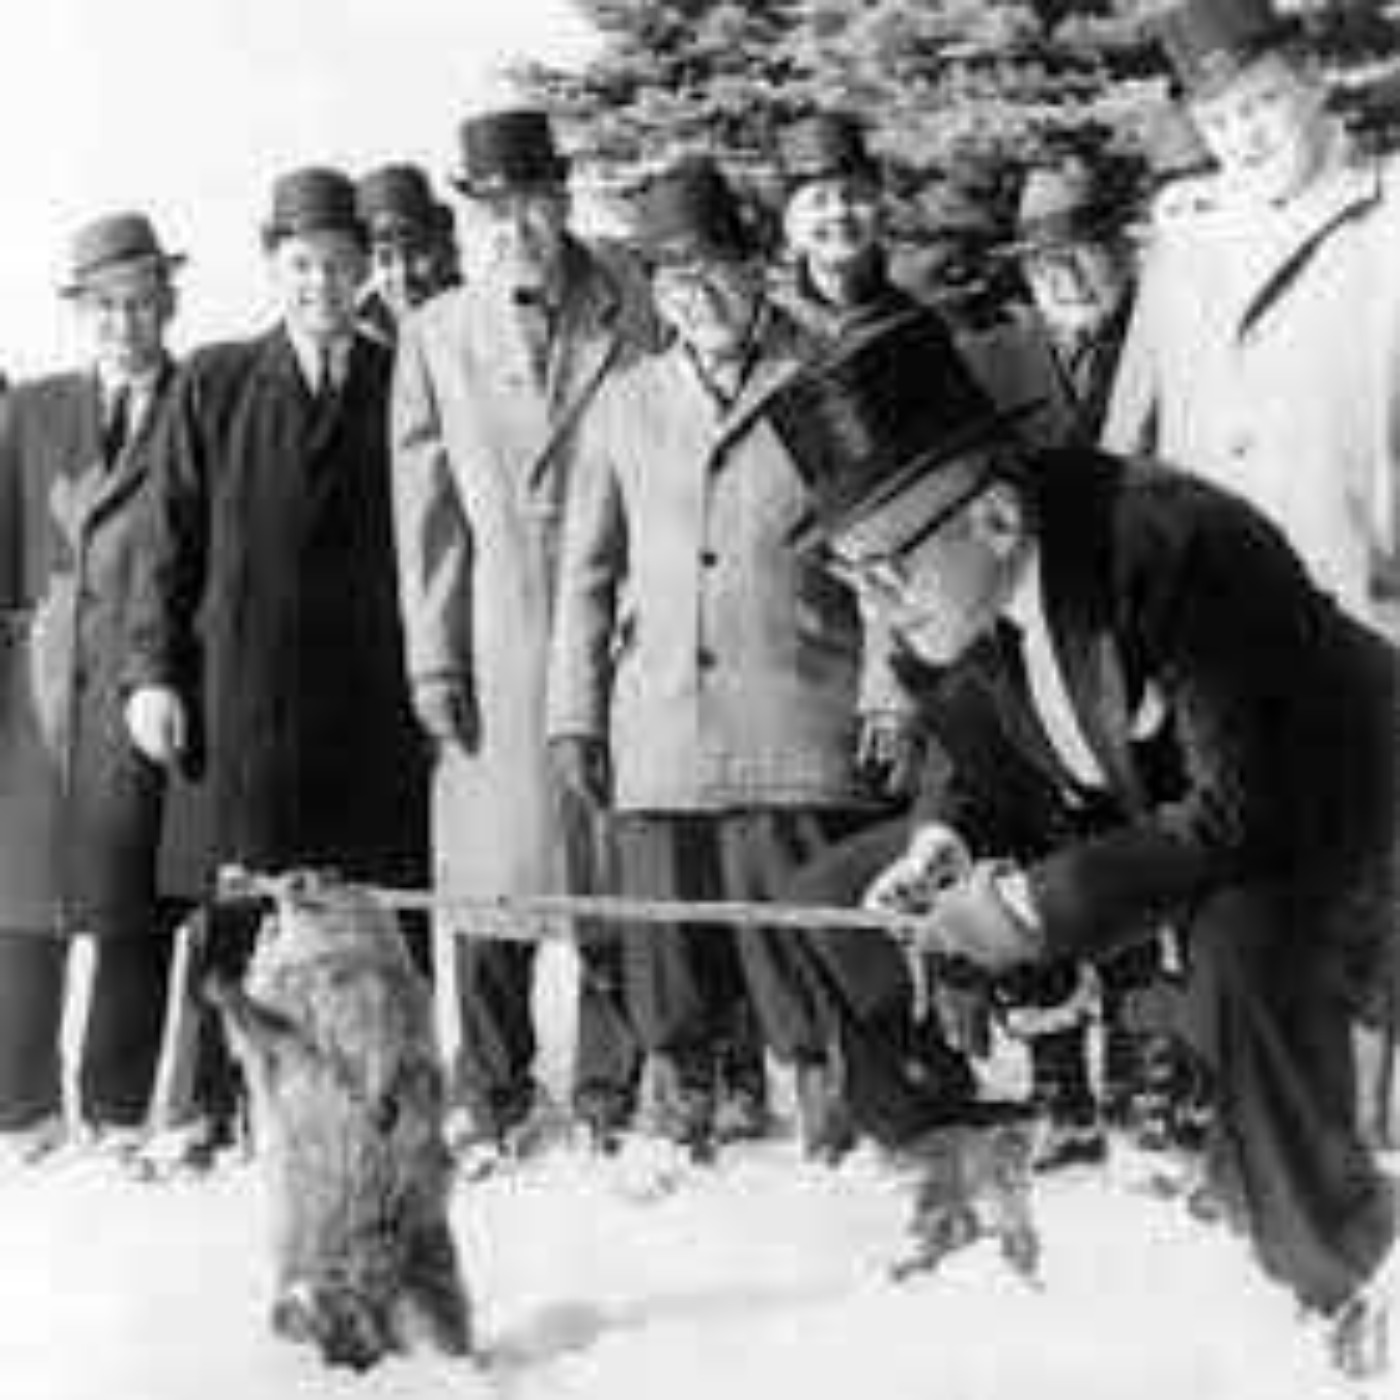 The First Groundhog Day